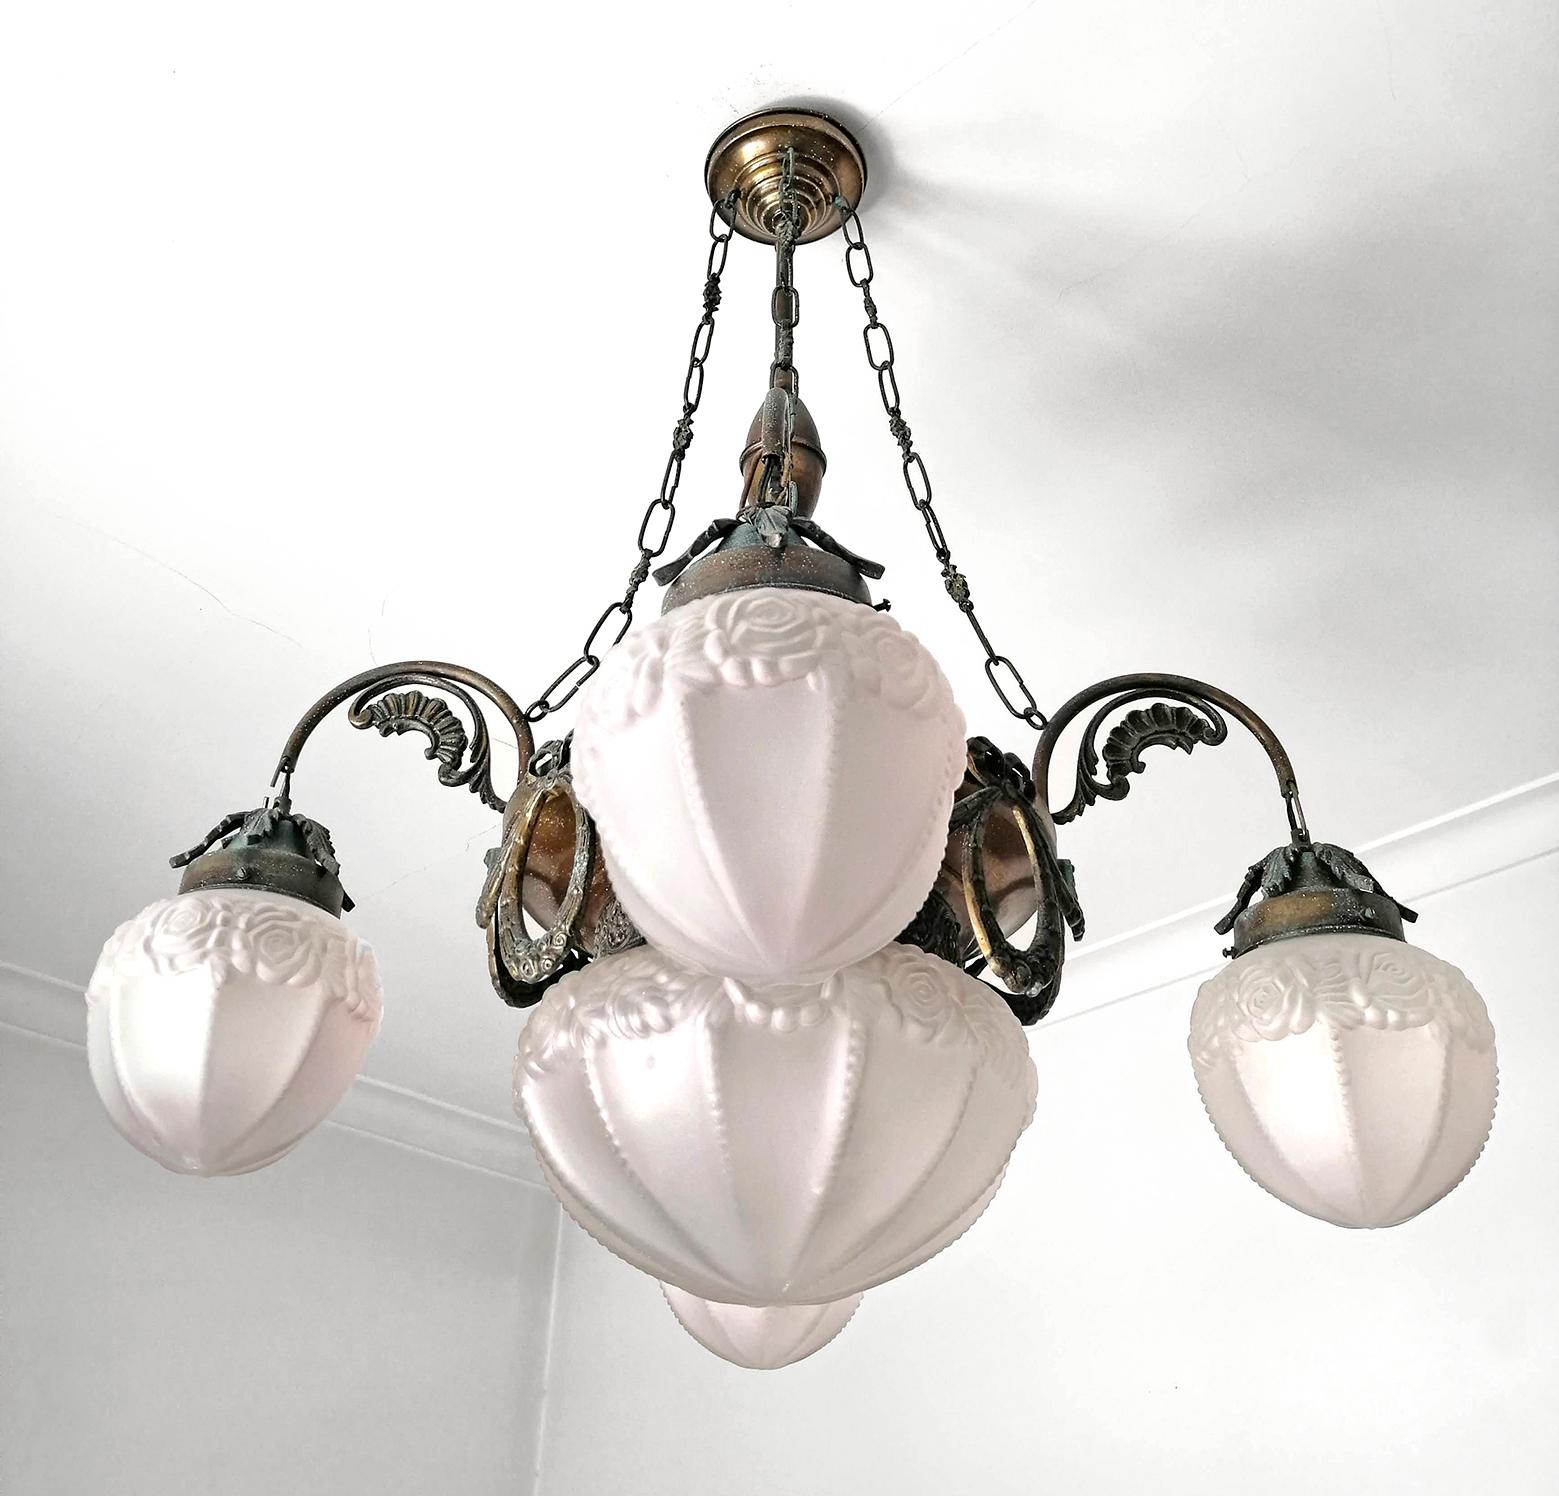 20th Century French Art Deco and Art Nouveau Brass and Frosted Glass 5-Light Chandelier For Sale